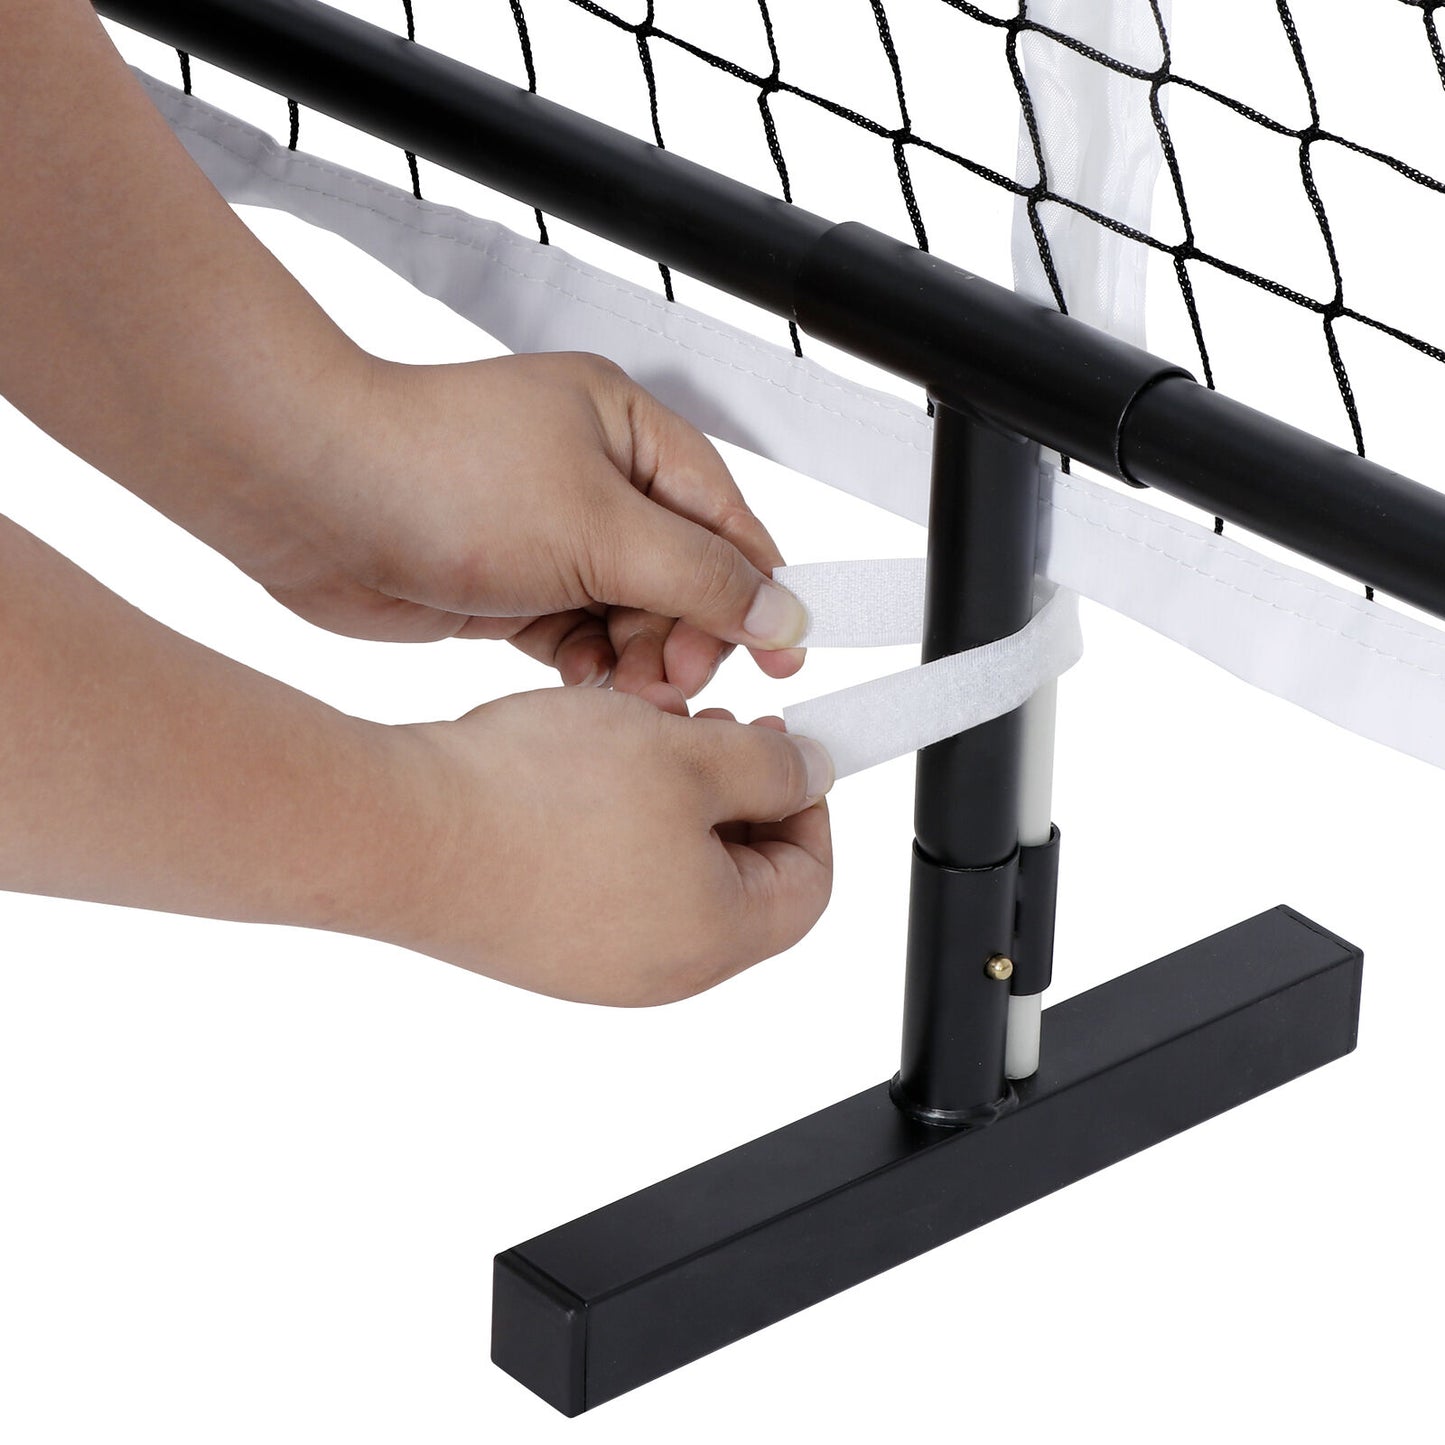 Portable Pickleball Net Set with Metal Frame Stand Carrying Bag Regulation Size